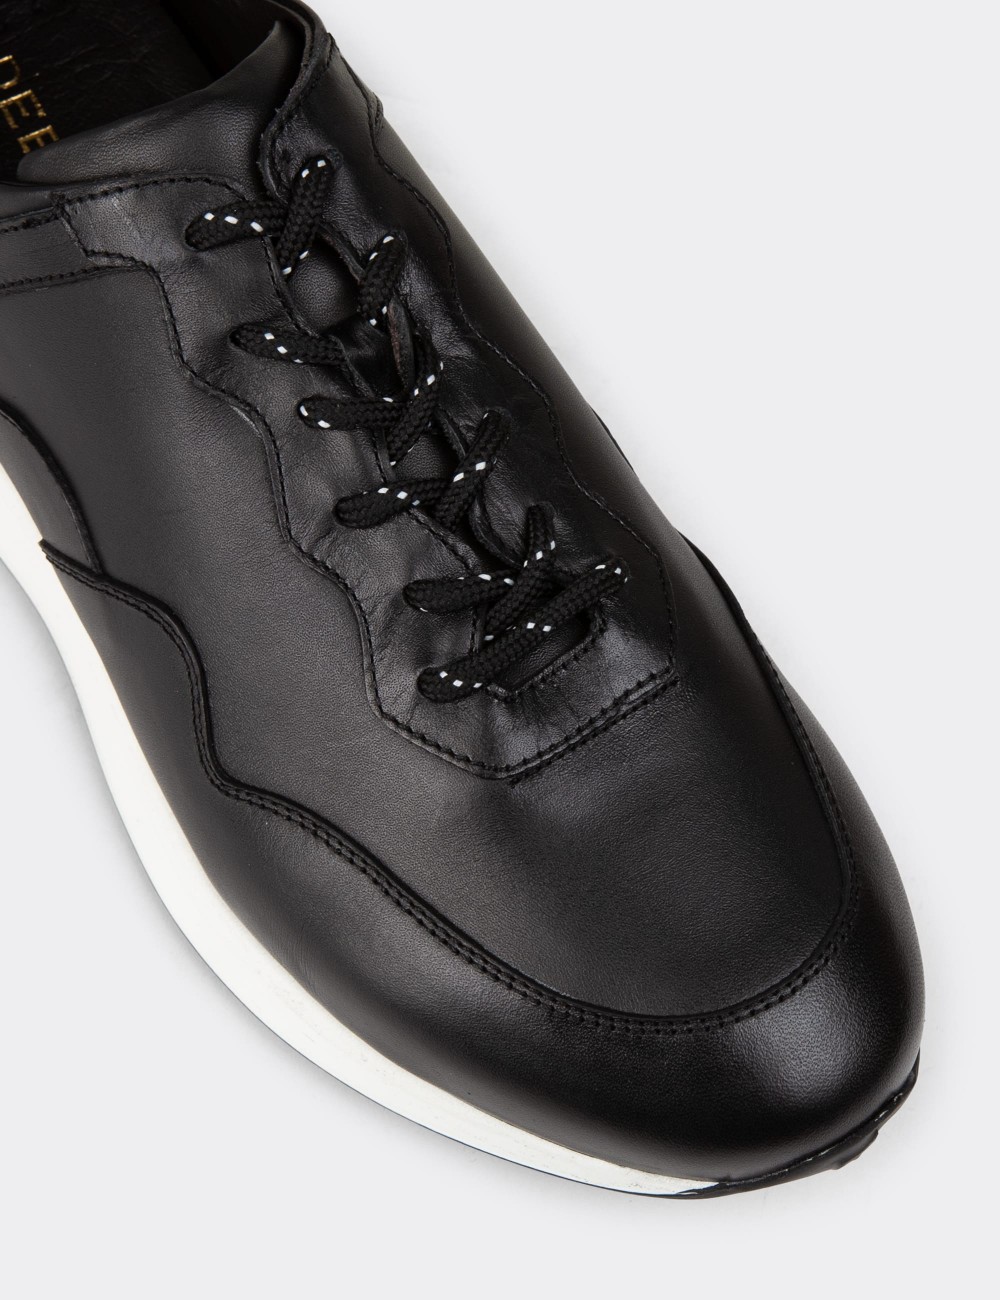 Black Leather Sneakers - 01725MSYHE11